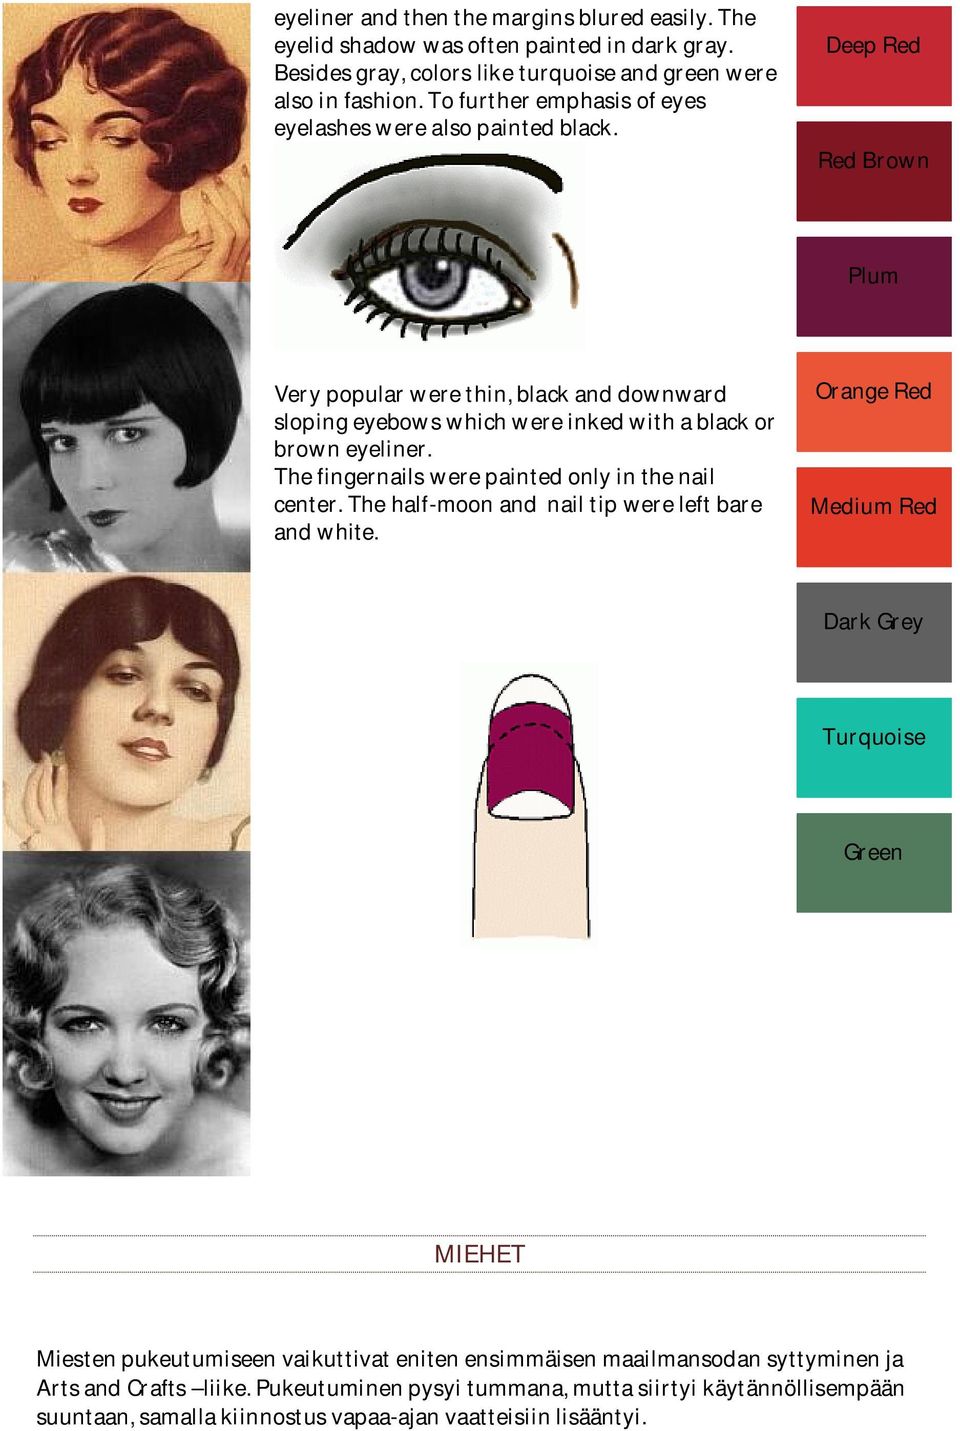 Deep Red Red Brown Plum Very popular were thin, black and downward sloping eyebows which were inked with a black or brown eyeliner. The fingernails were painted only in the nail center.